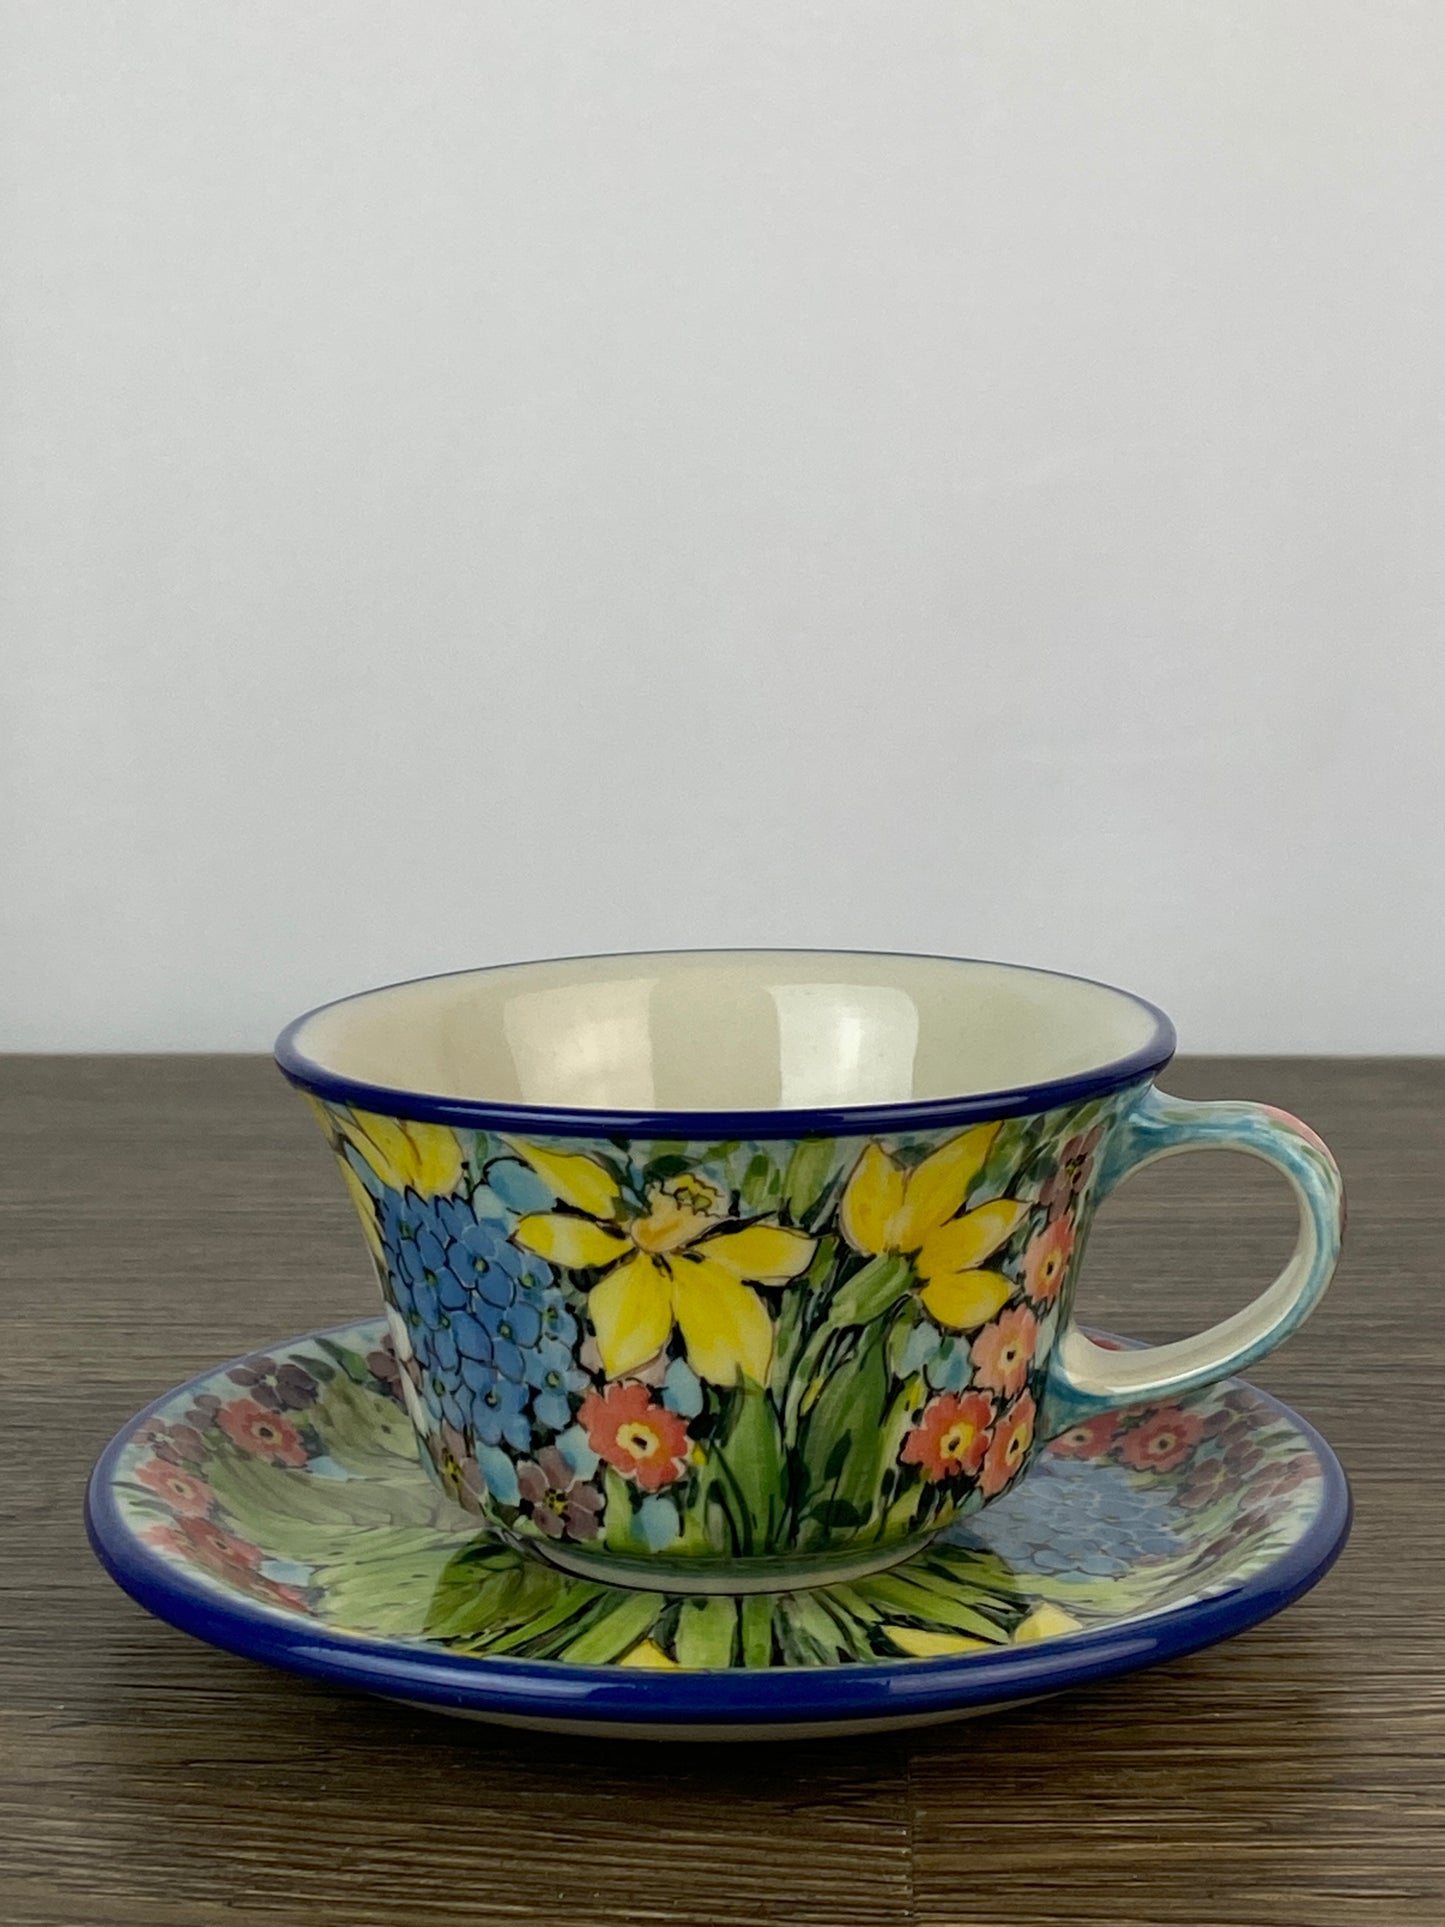 Teresa Liana Limited Edition Cup and Saucer - Shape F76 - Pattern L998 - C